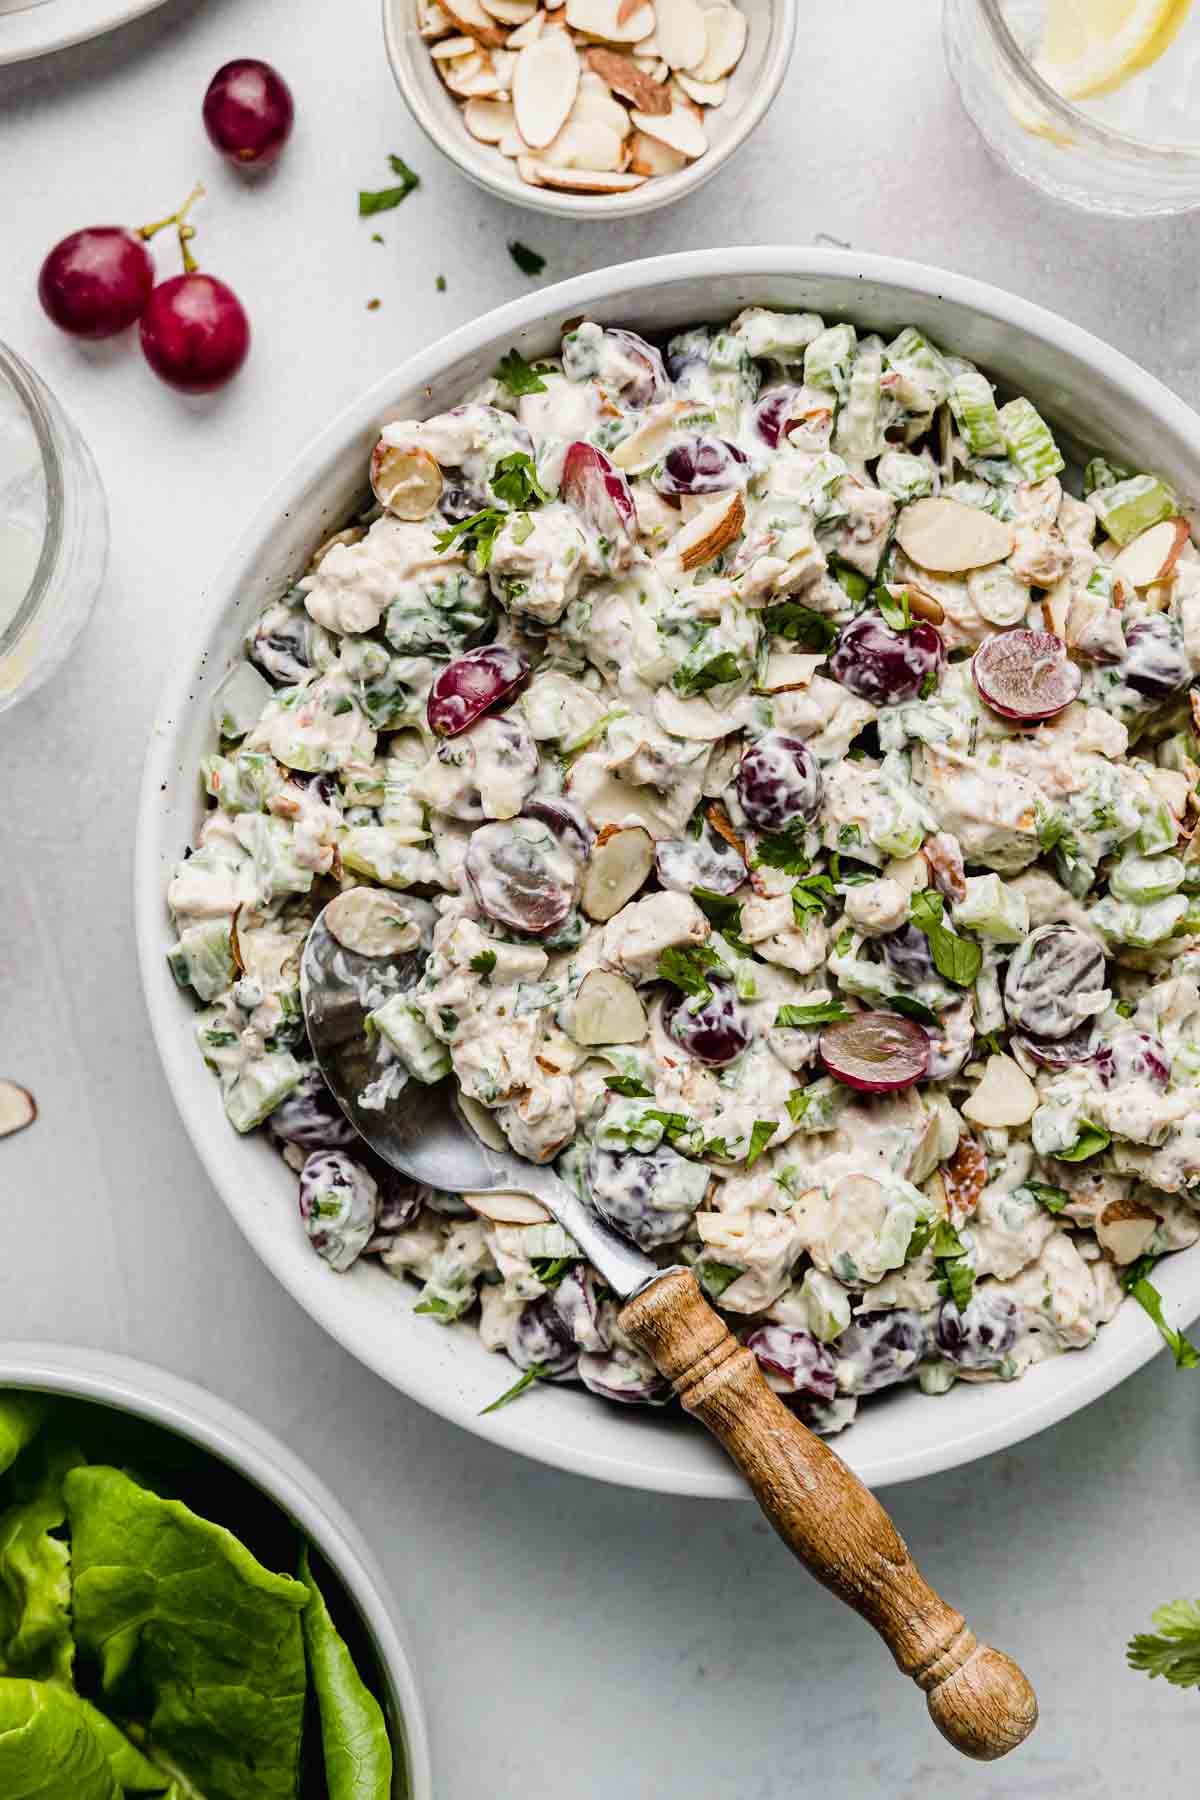 Chicken salad in large white bowl next to grapes, sliced almonds, and lettuce.